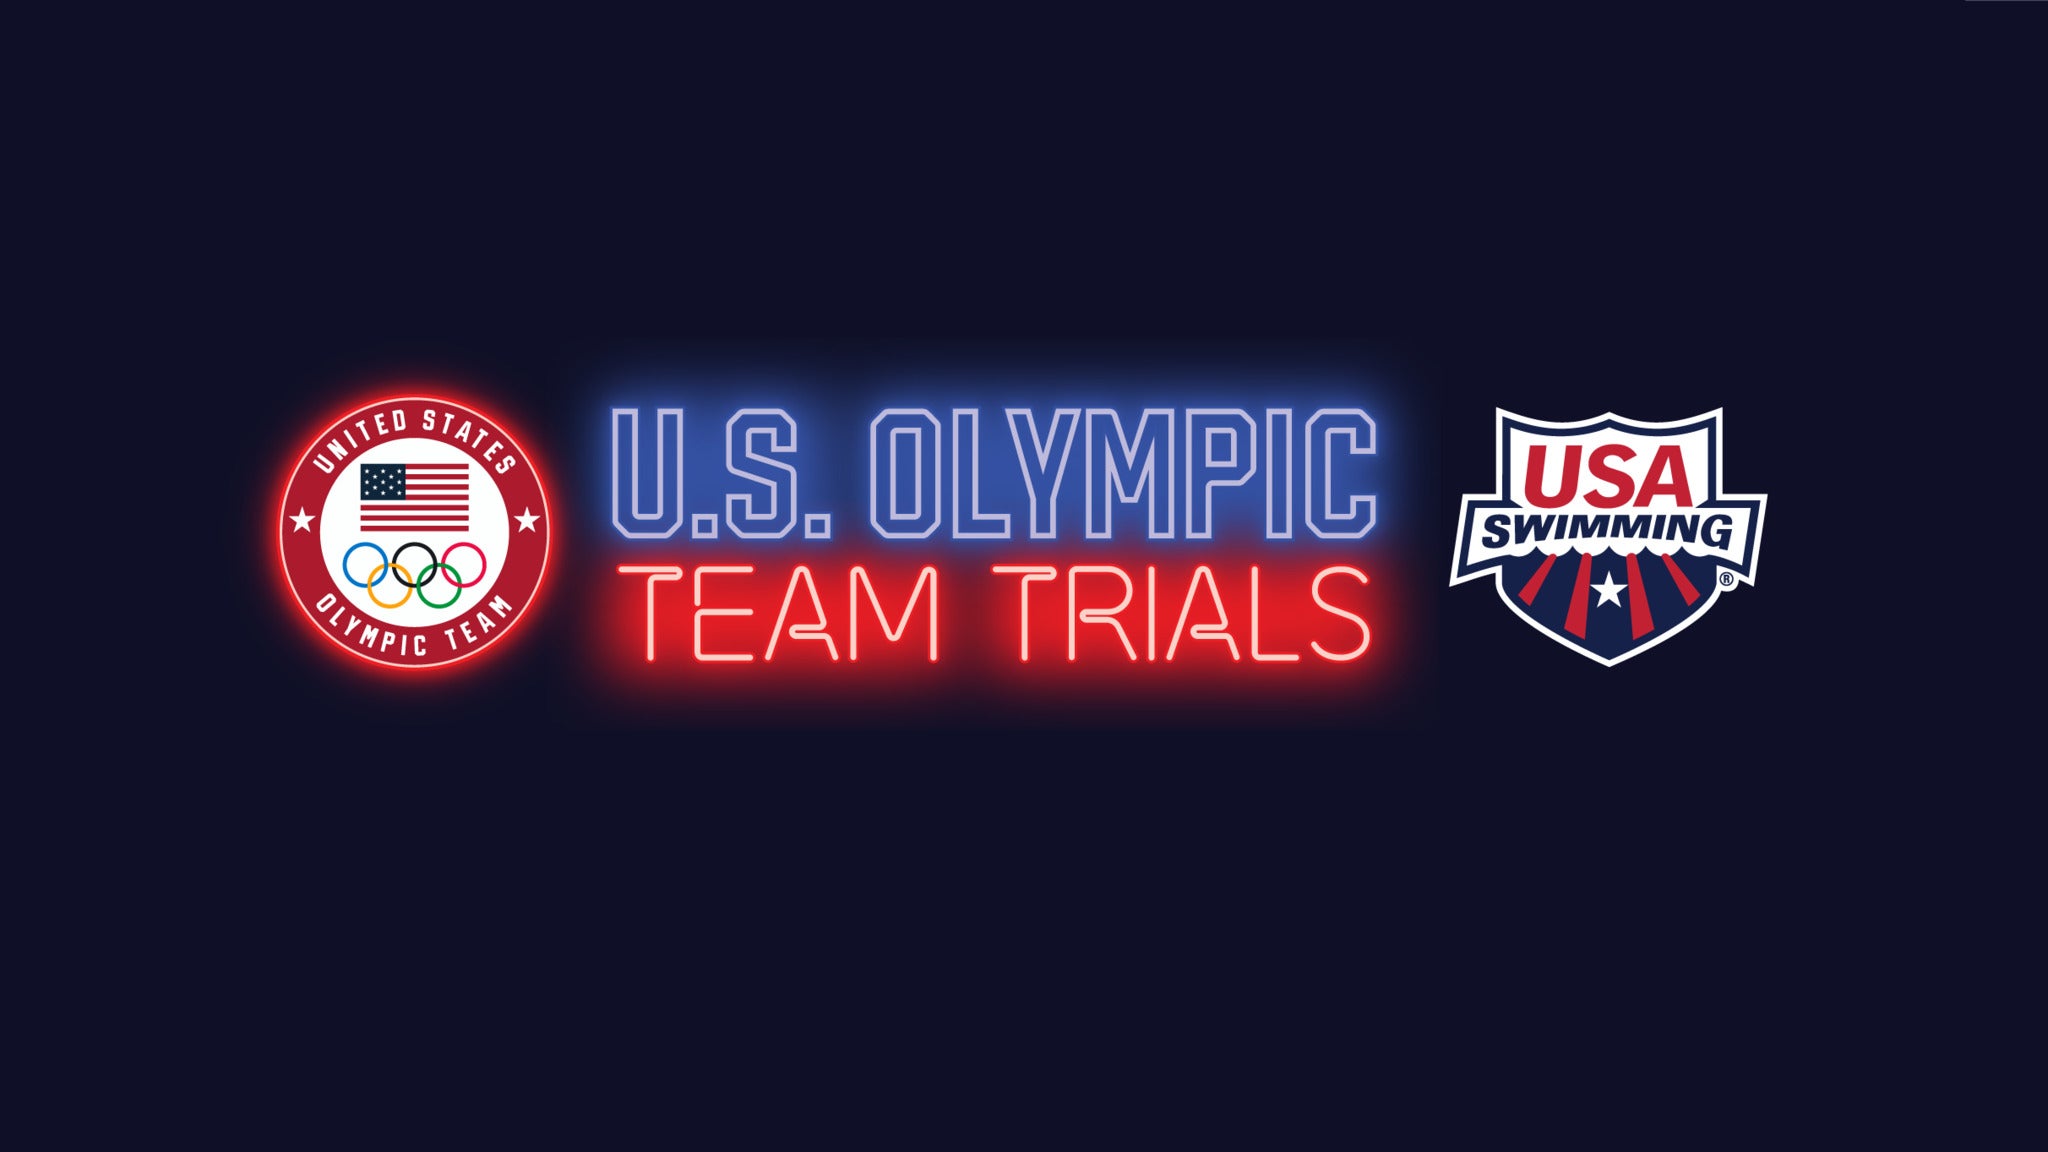 All-Session - U.S. Olympic Team Trials - Swimming in Omaha promo photo for Past Purchase presale offer code